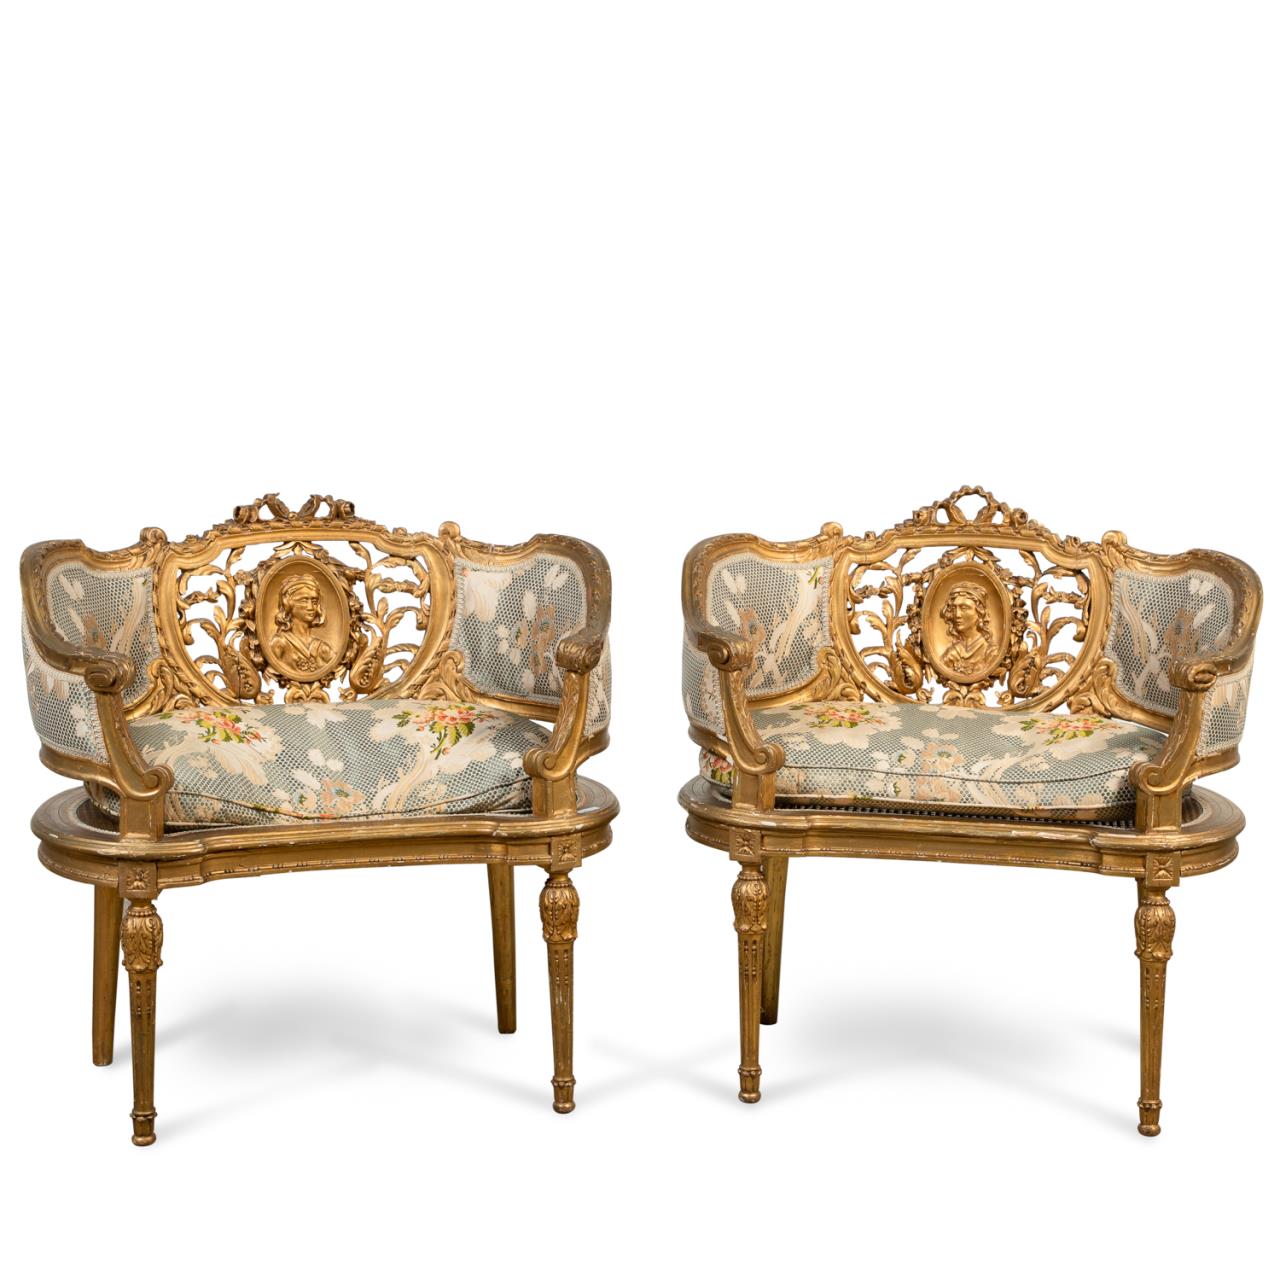 PAIR LOUIS XVI STYLE GOLD PAINTED 358f37